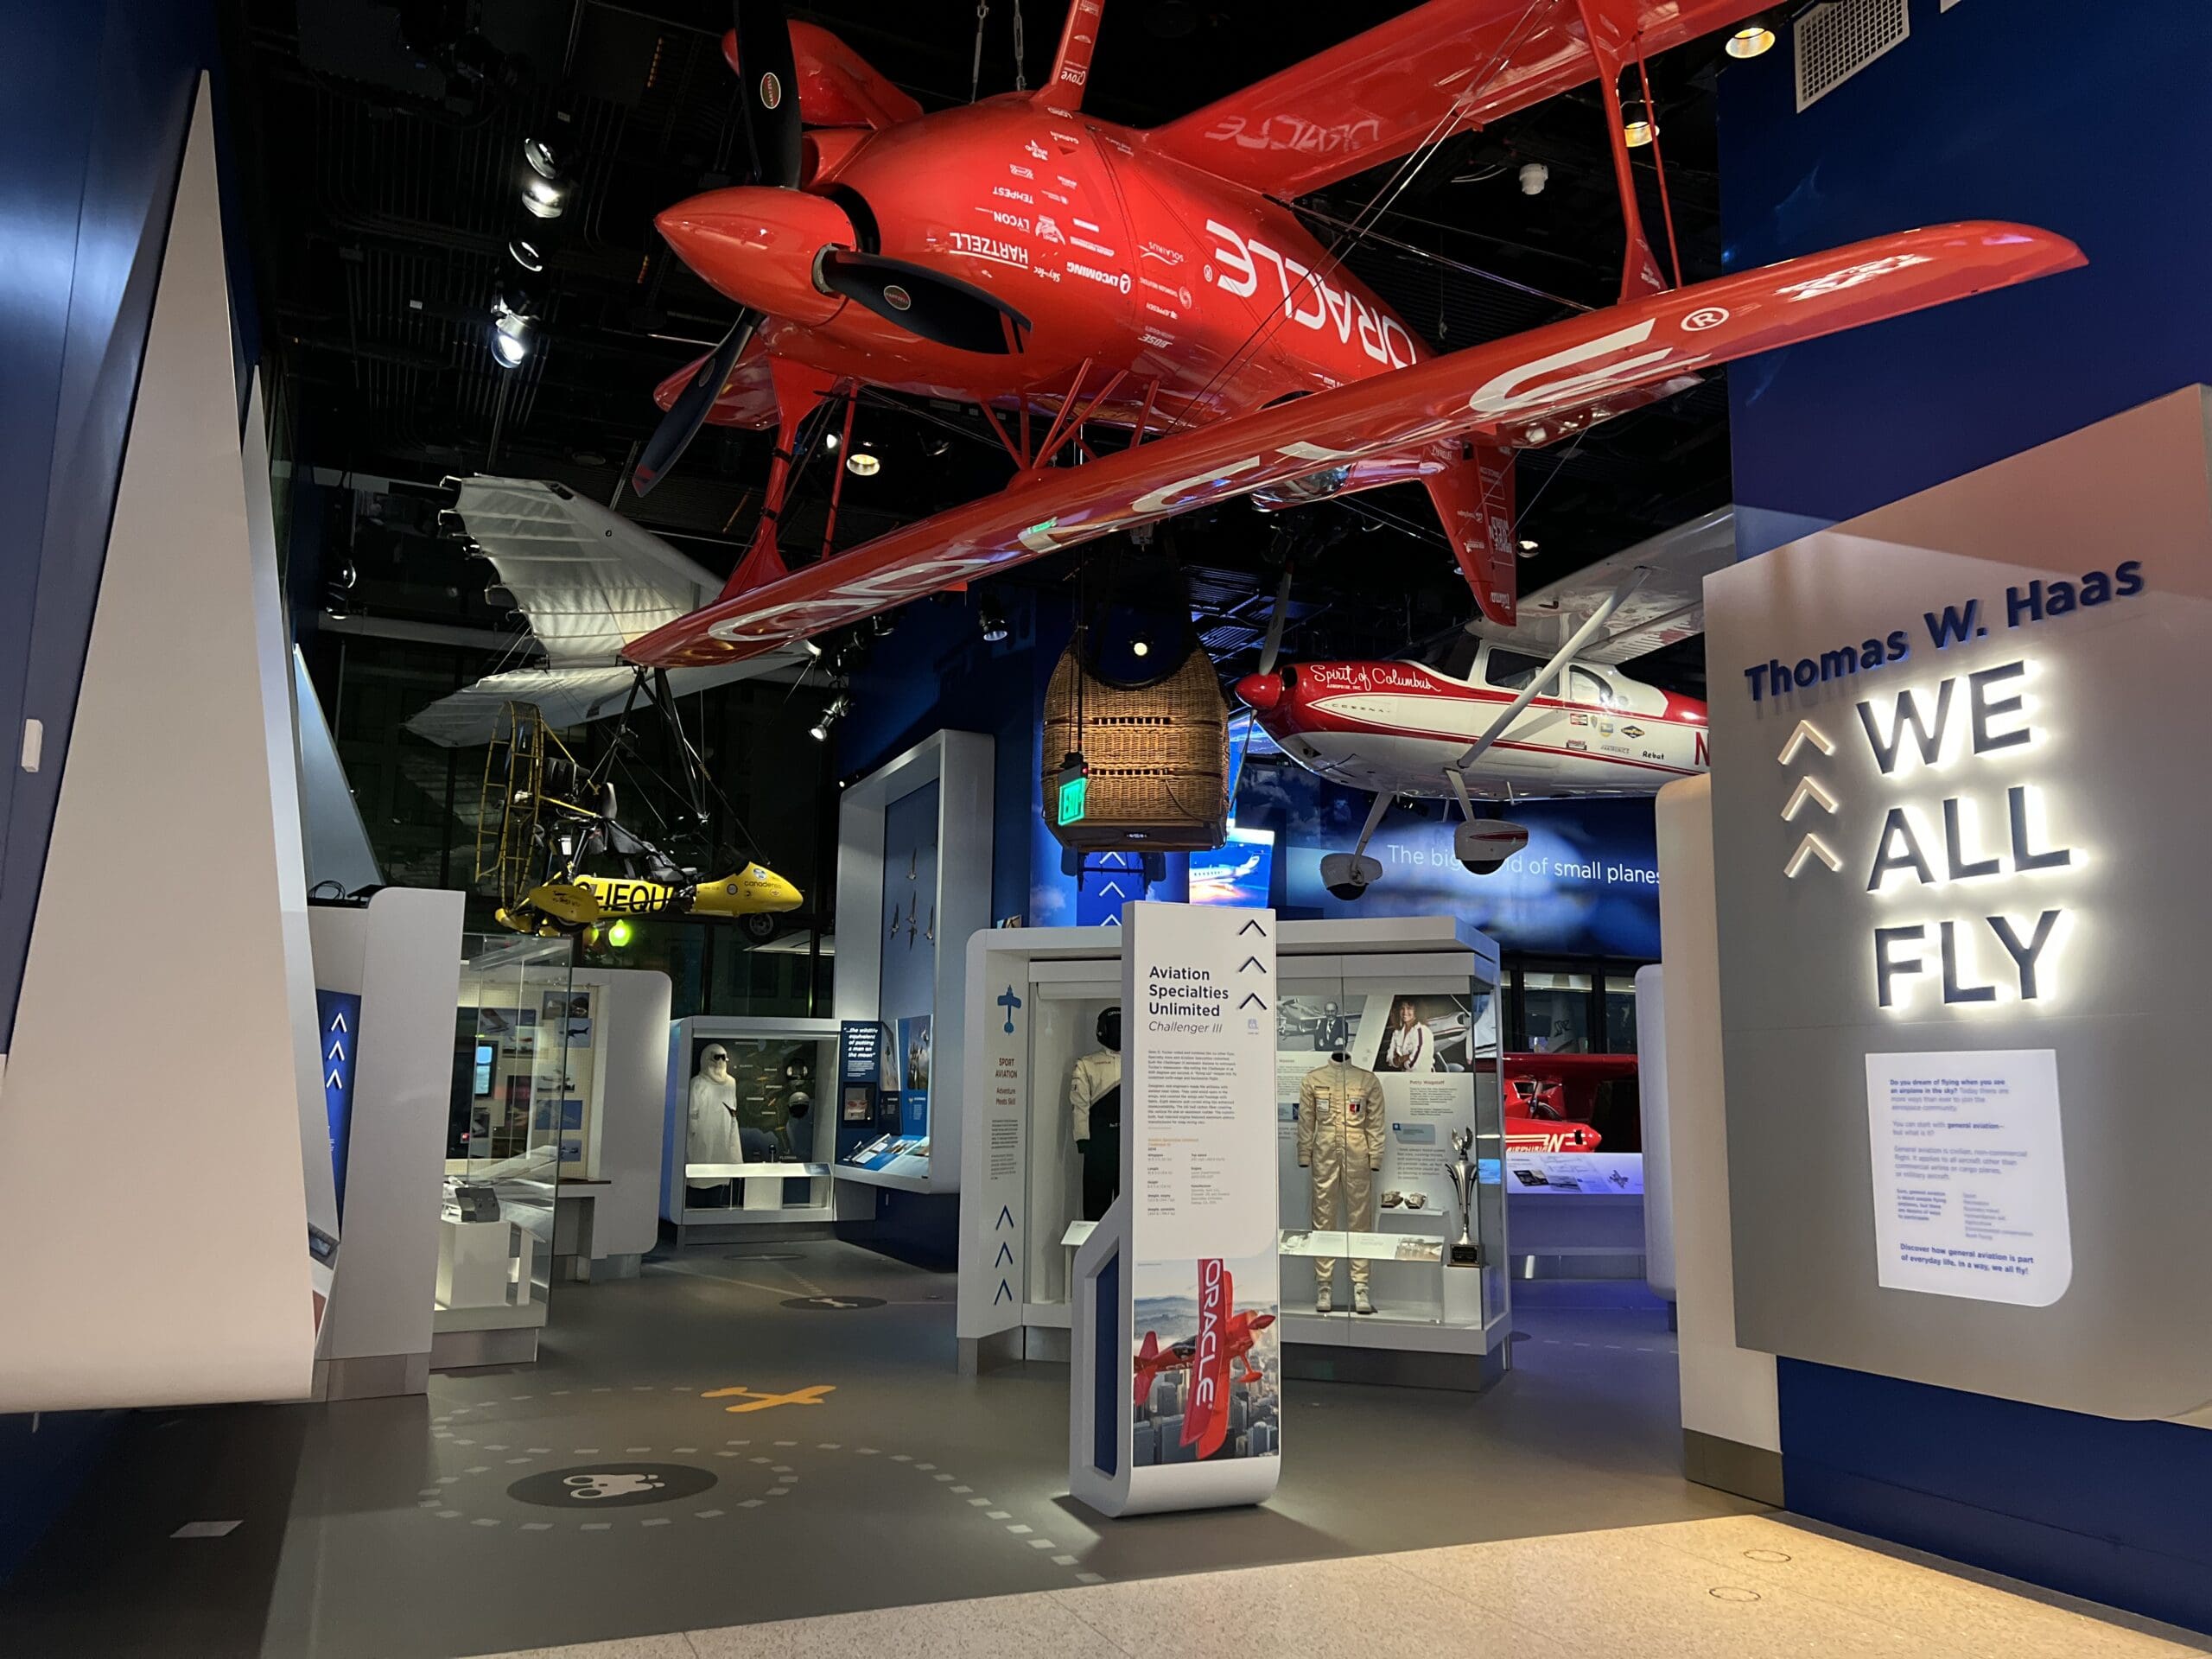 National Air and Space Museum – Washington D.C. – 2022